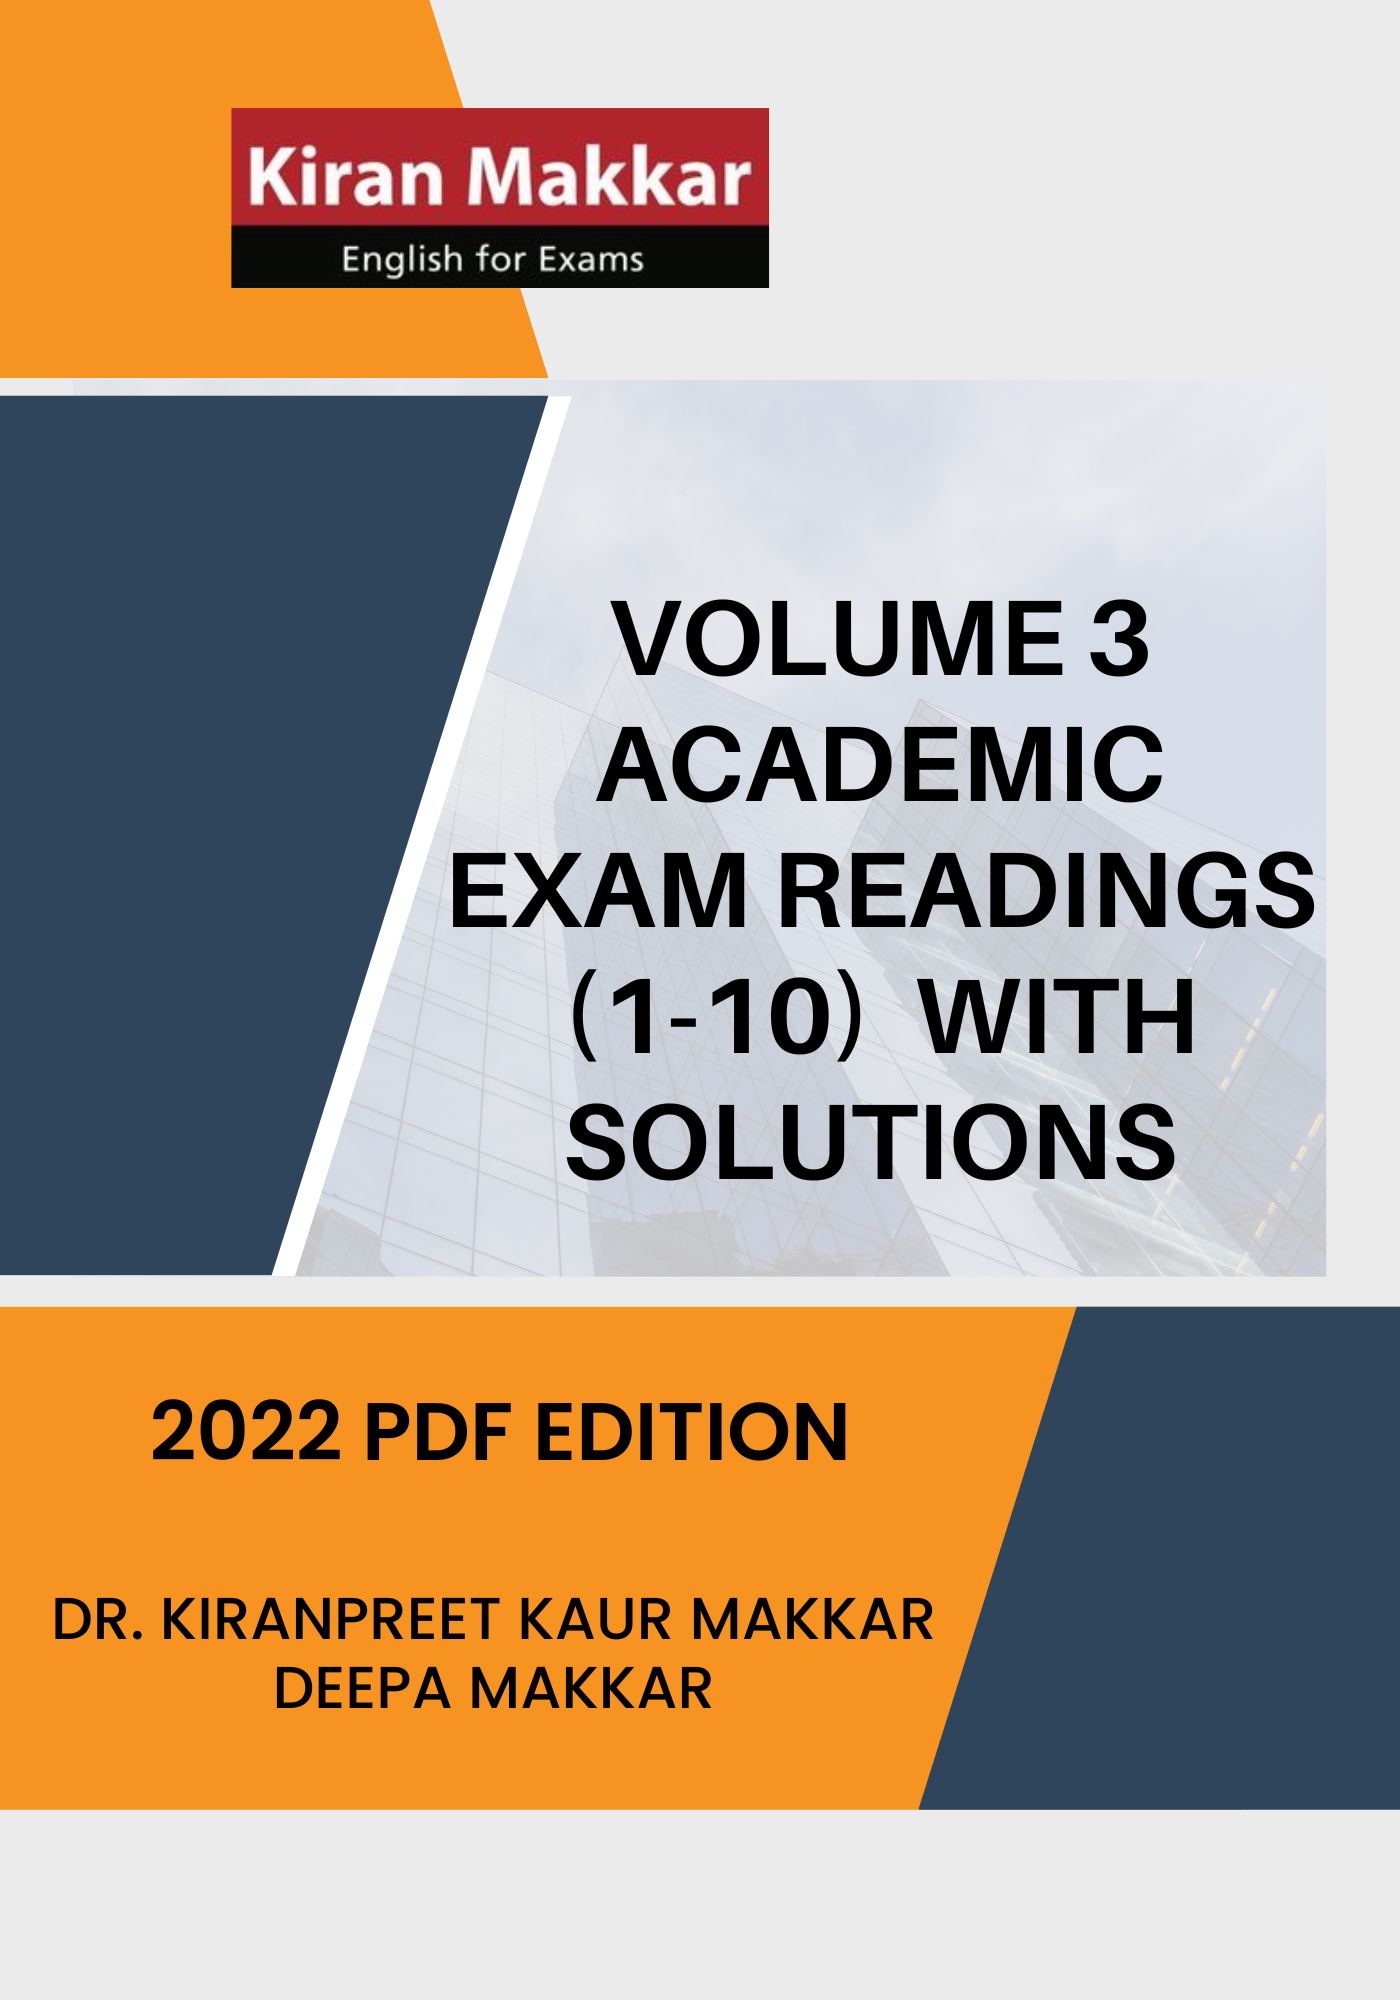 Volume 3 Academic Exam Readings (1-10) with Solutions